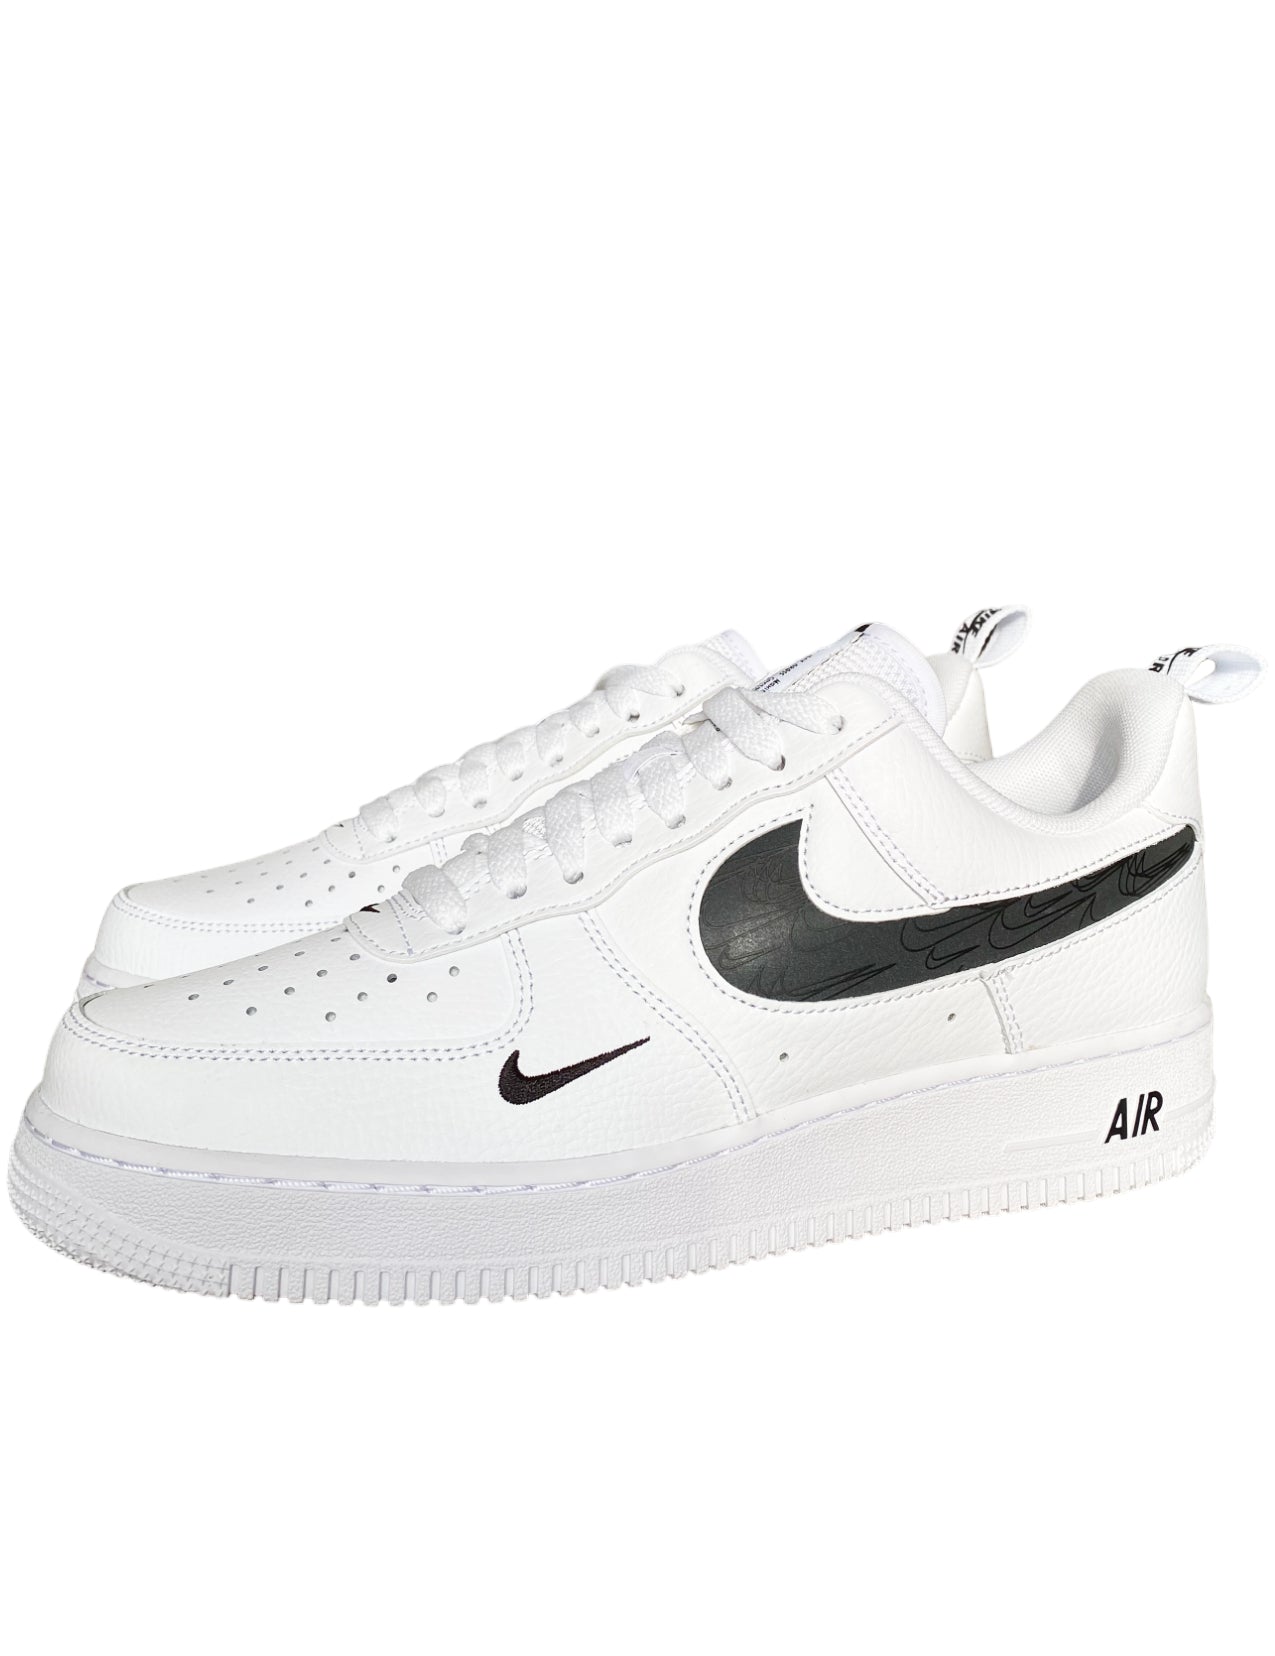 NIKE AIR FORCE 1 LOW 07 "REFLECTIVE SWOOSH"